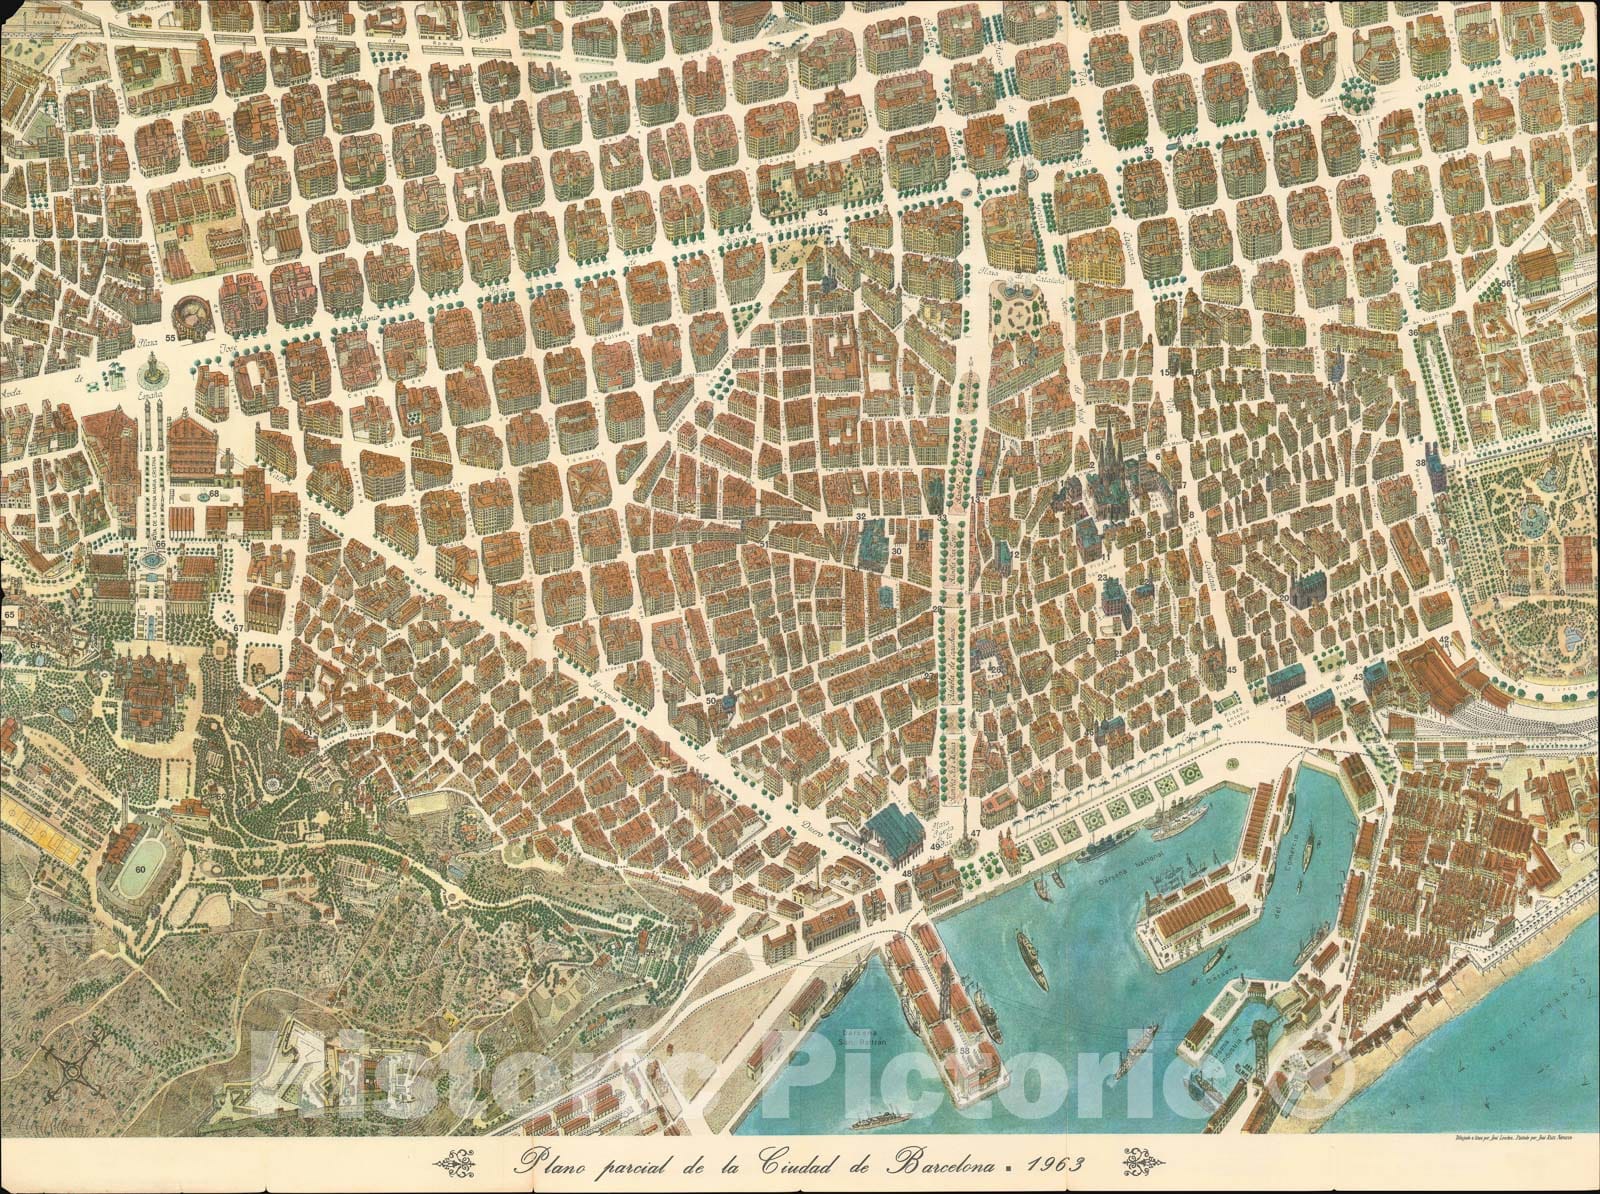 Historic Map : Pictorial Map of Barcelona, Spain, Loeches and Navarro, 1963, Vintage Wall Art